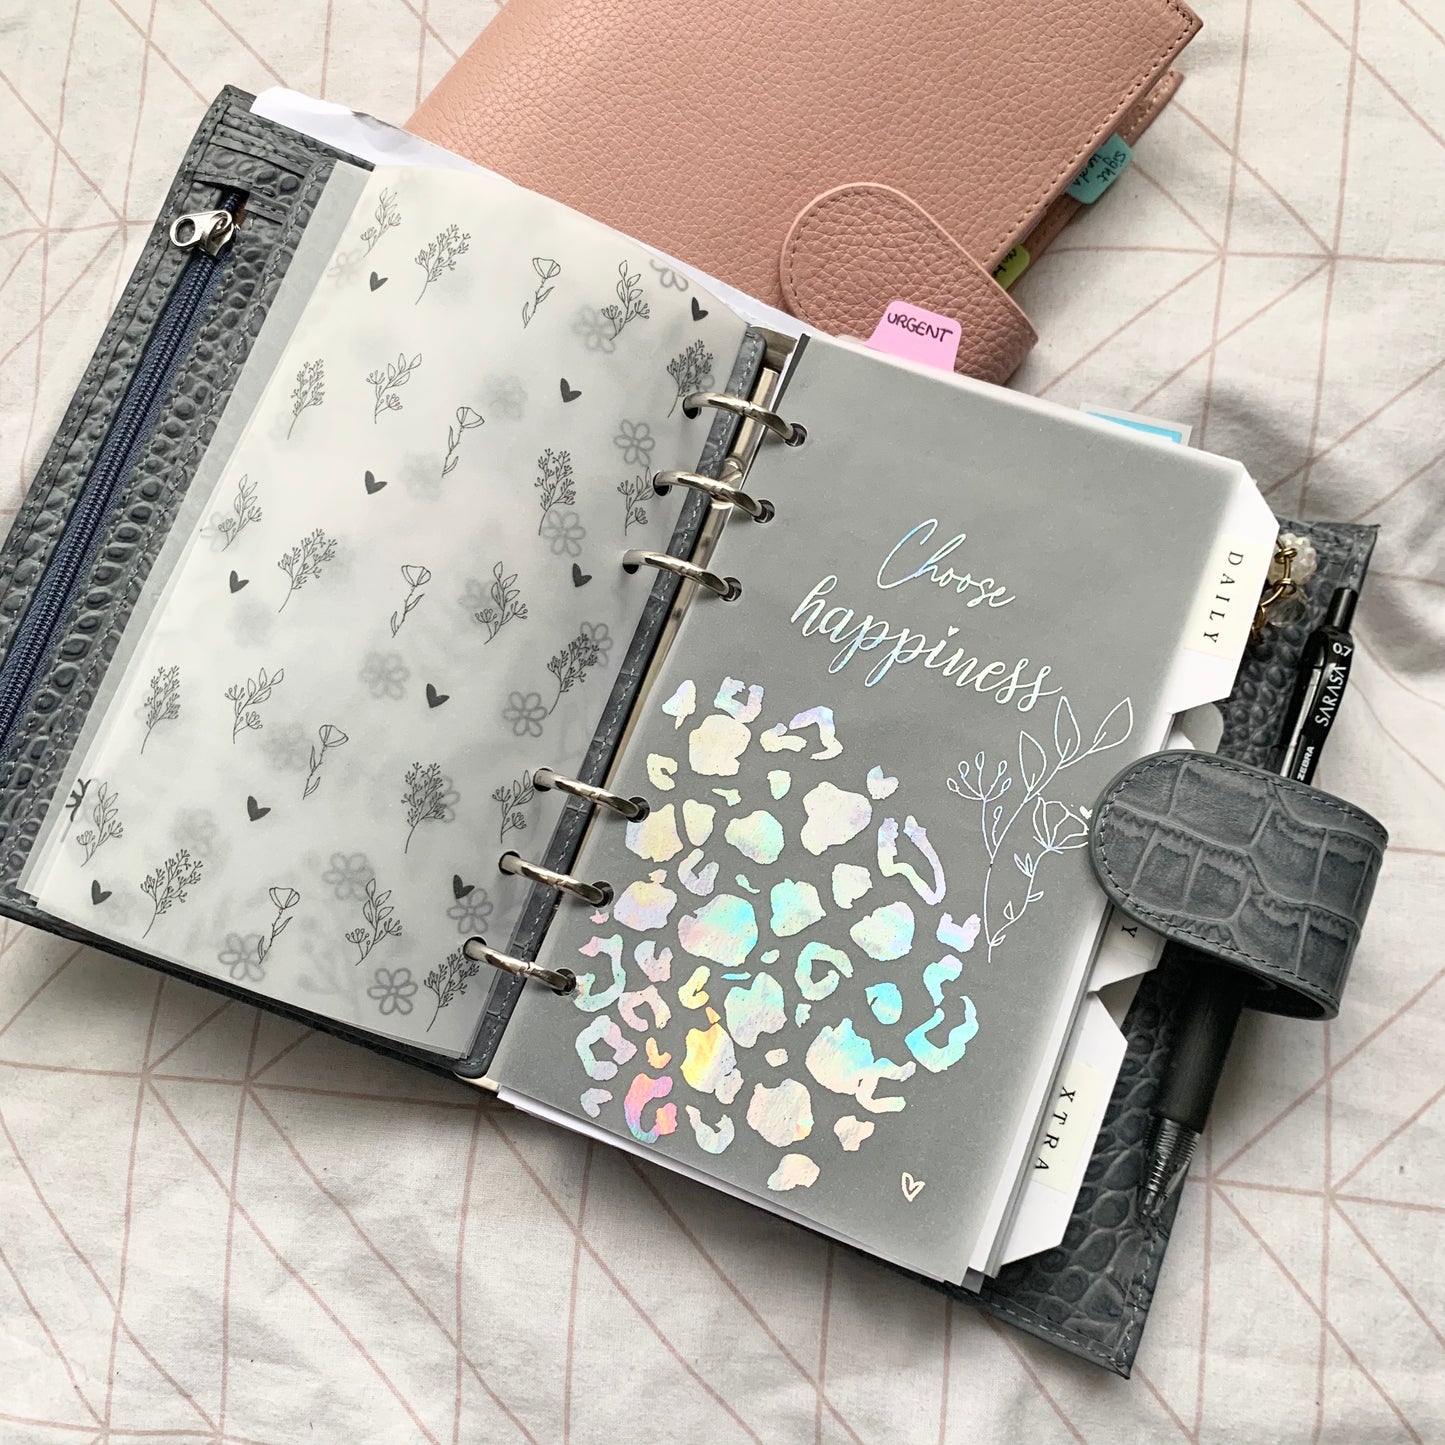 Printed Vellum Planner Dashboards - Choose Happiness leopard X floral design